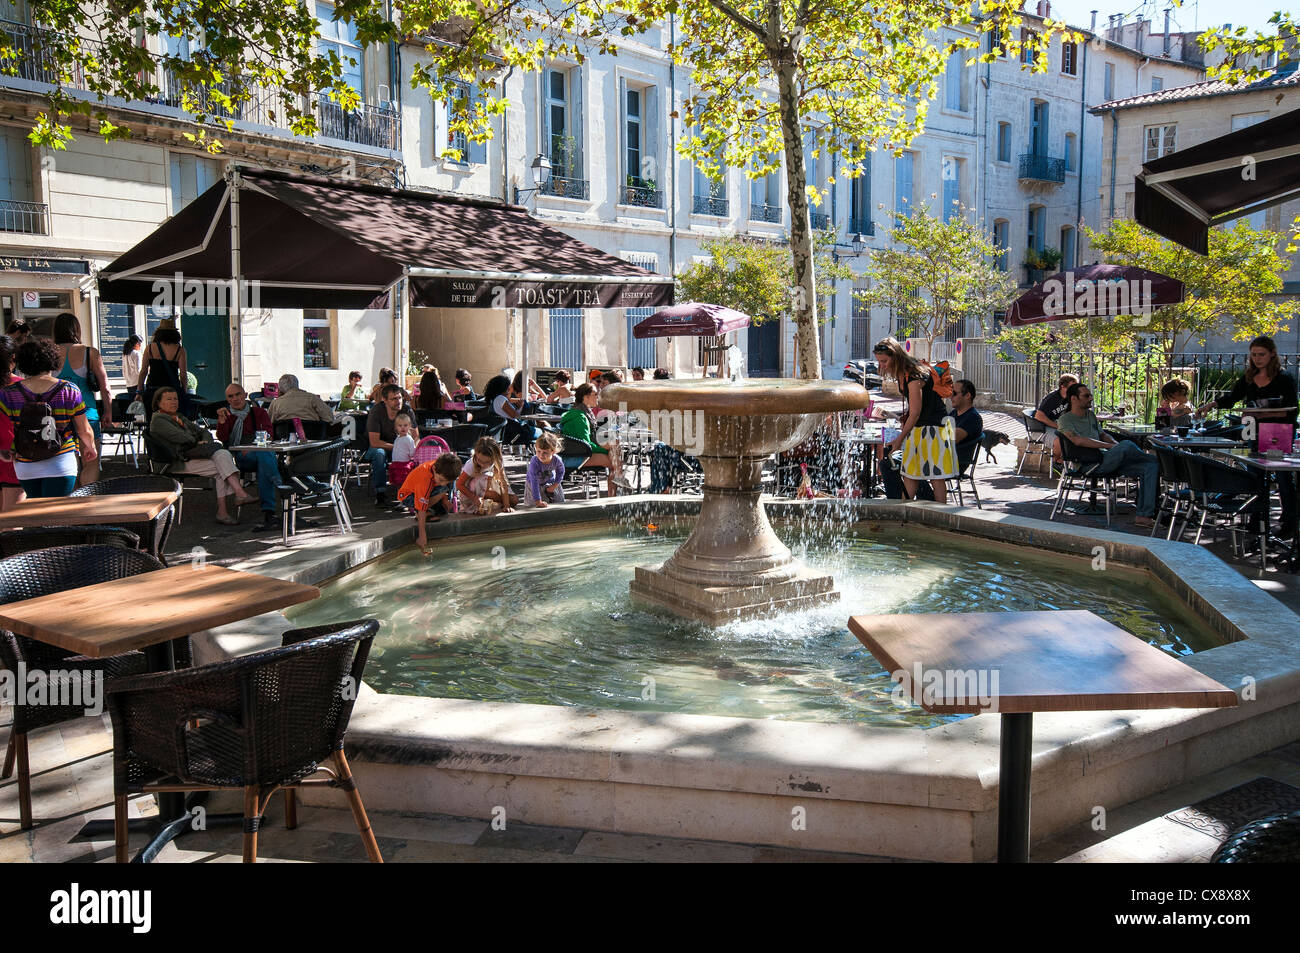 Fountain on the Toast and Tea cafe and bar terrace. Rue Vallat, Montpellier, Southern France Stock Photo